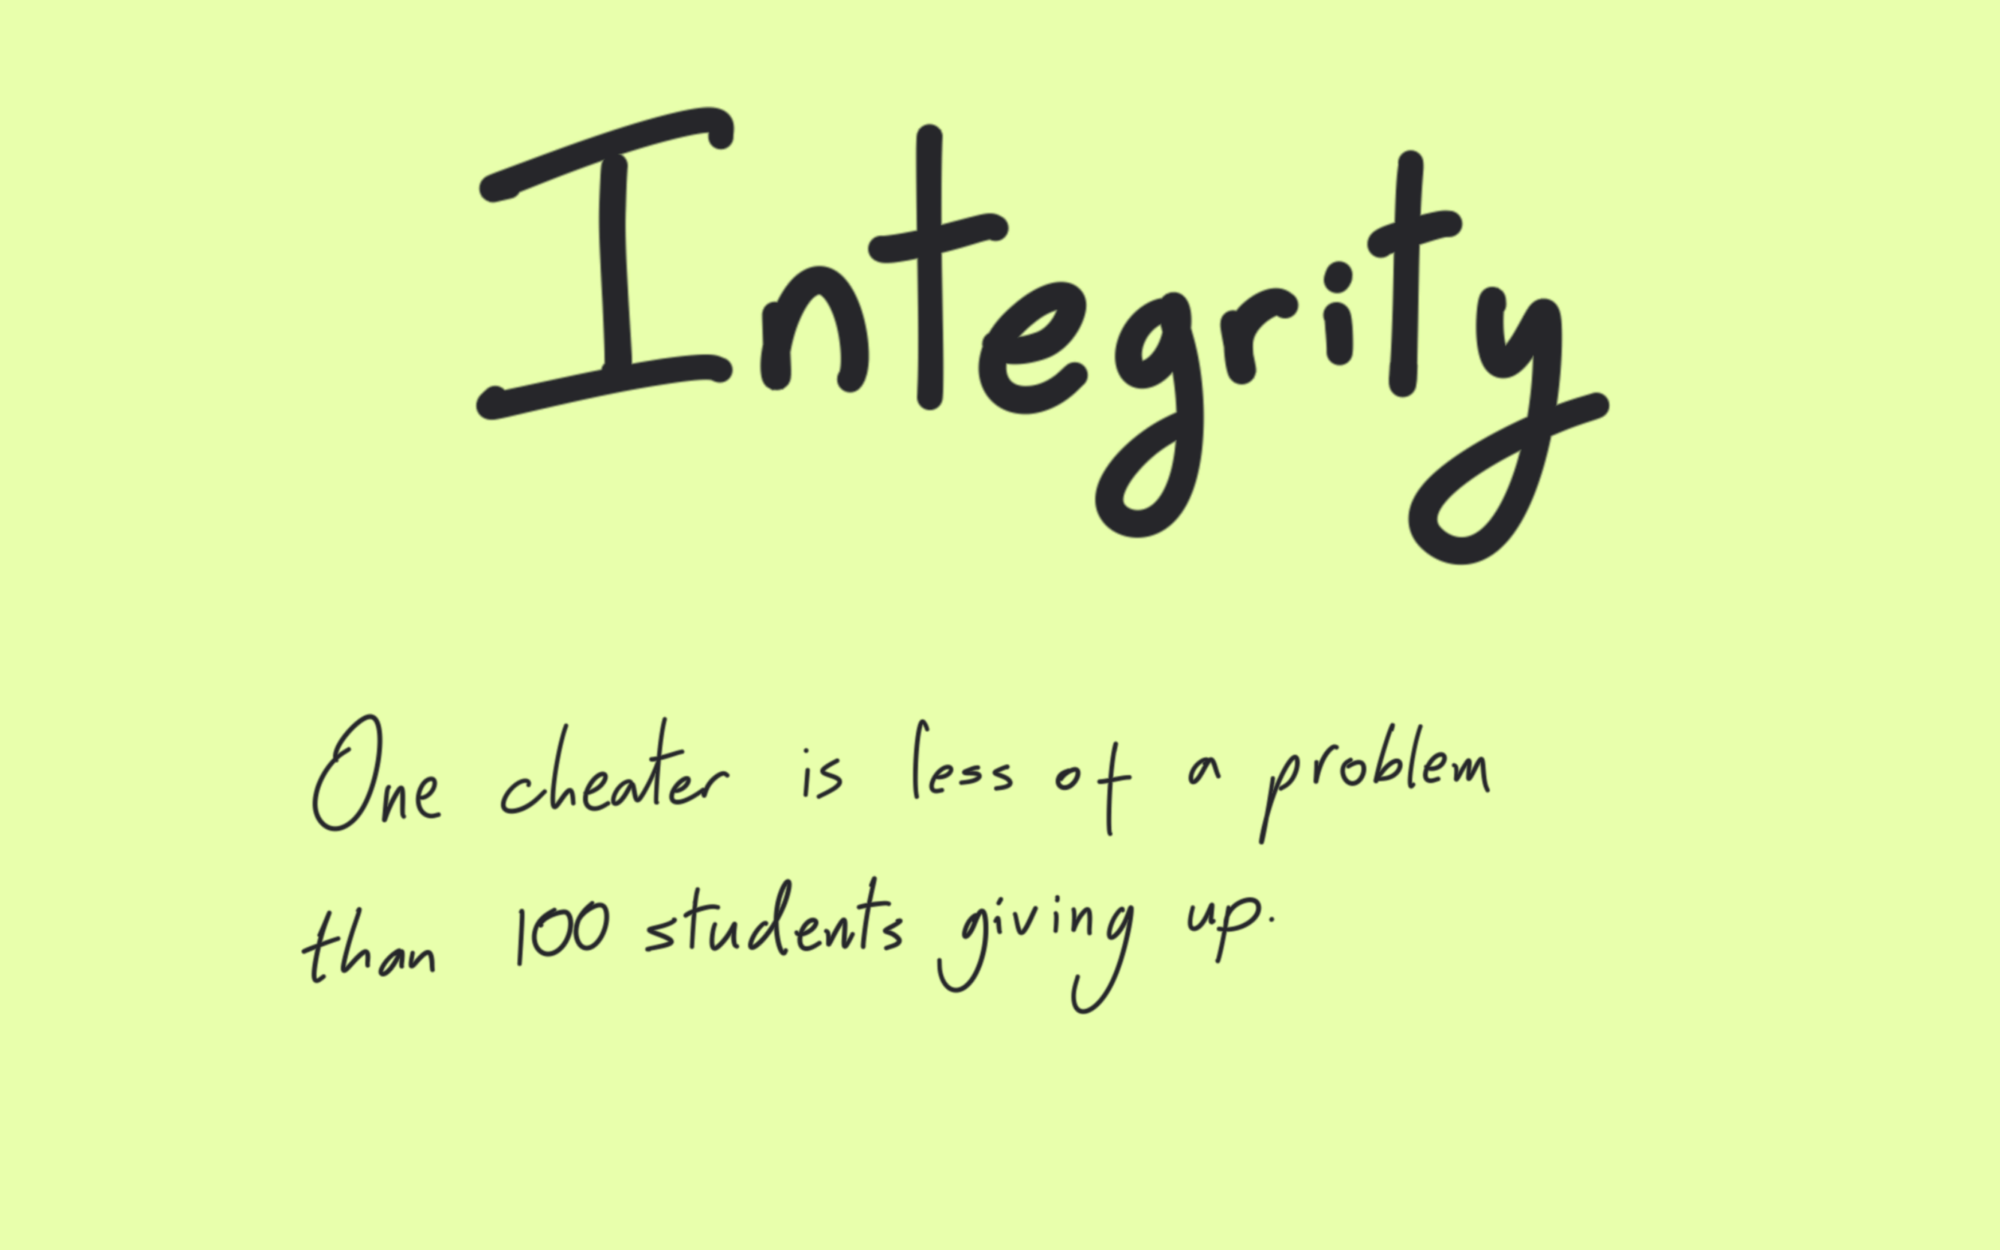 Integrity - one cheater is less of a problem than 100 students giving up.